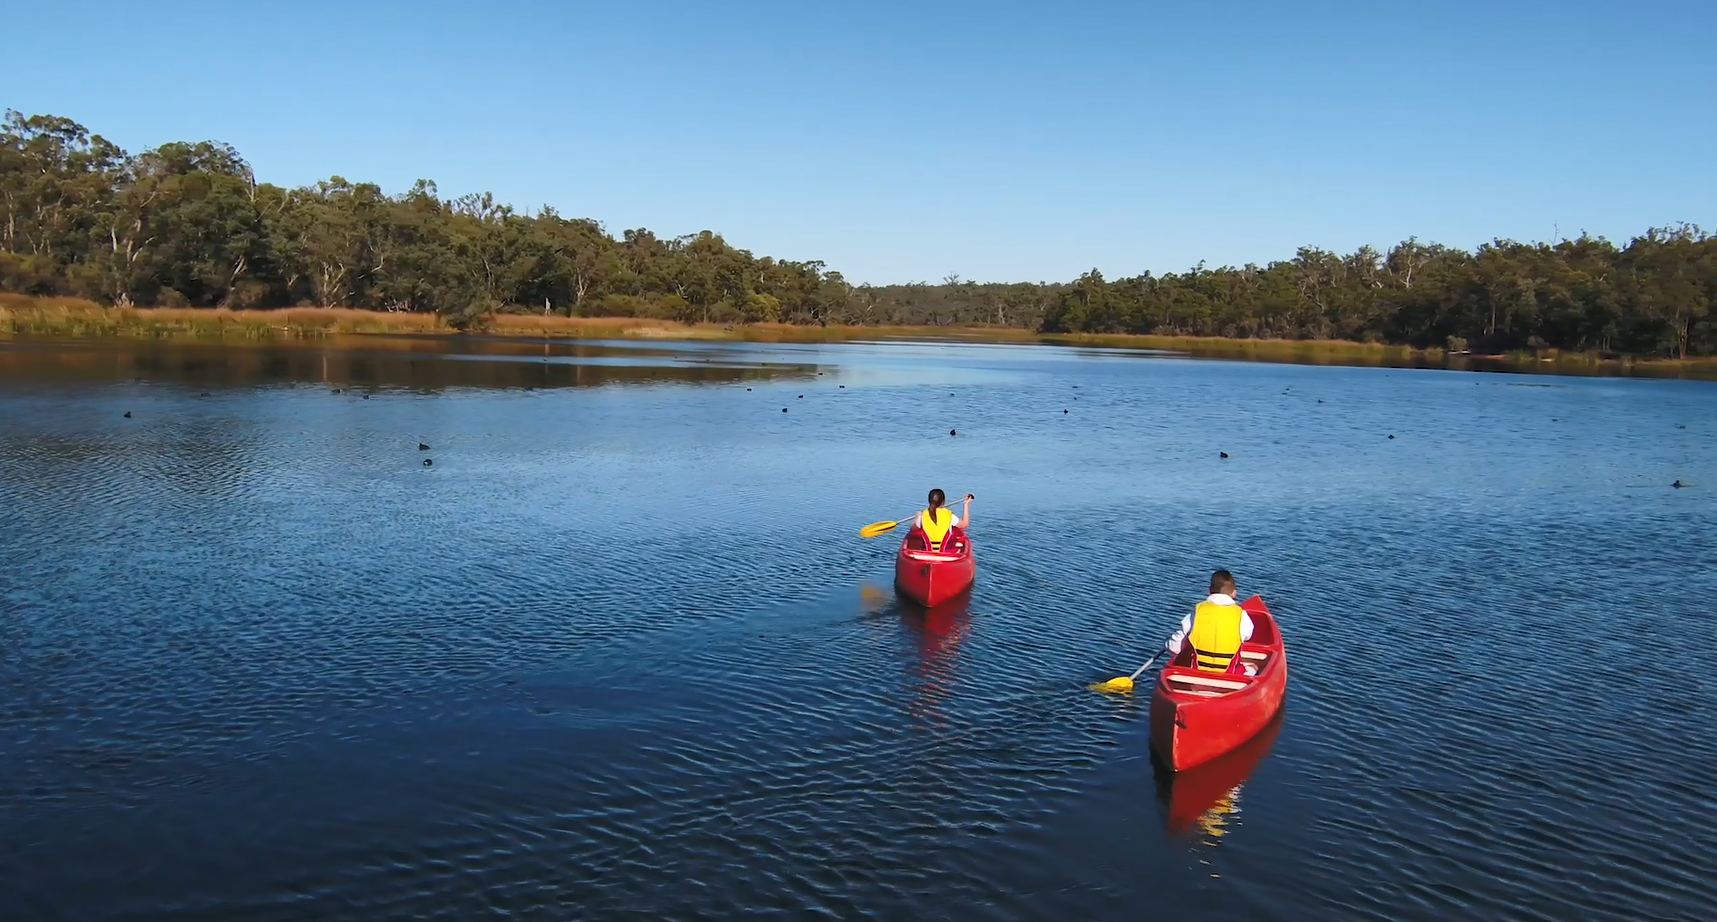 People canoeing on Lake Leschenaultia in the Perth hills